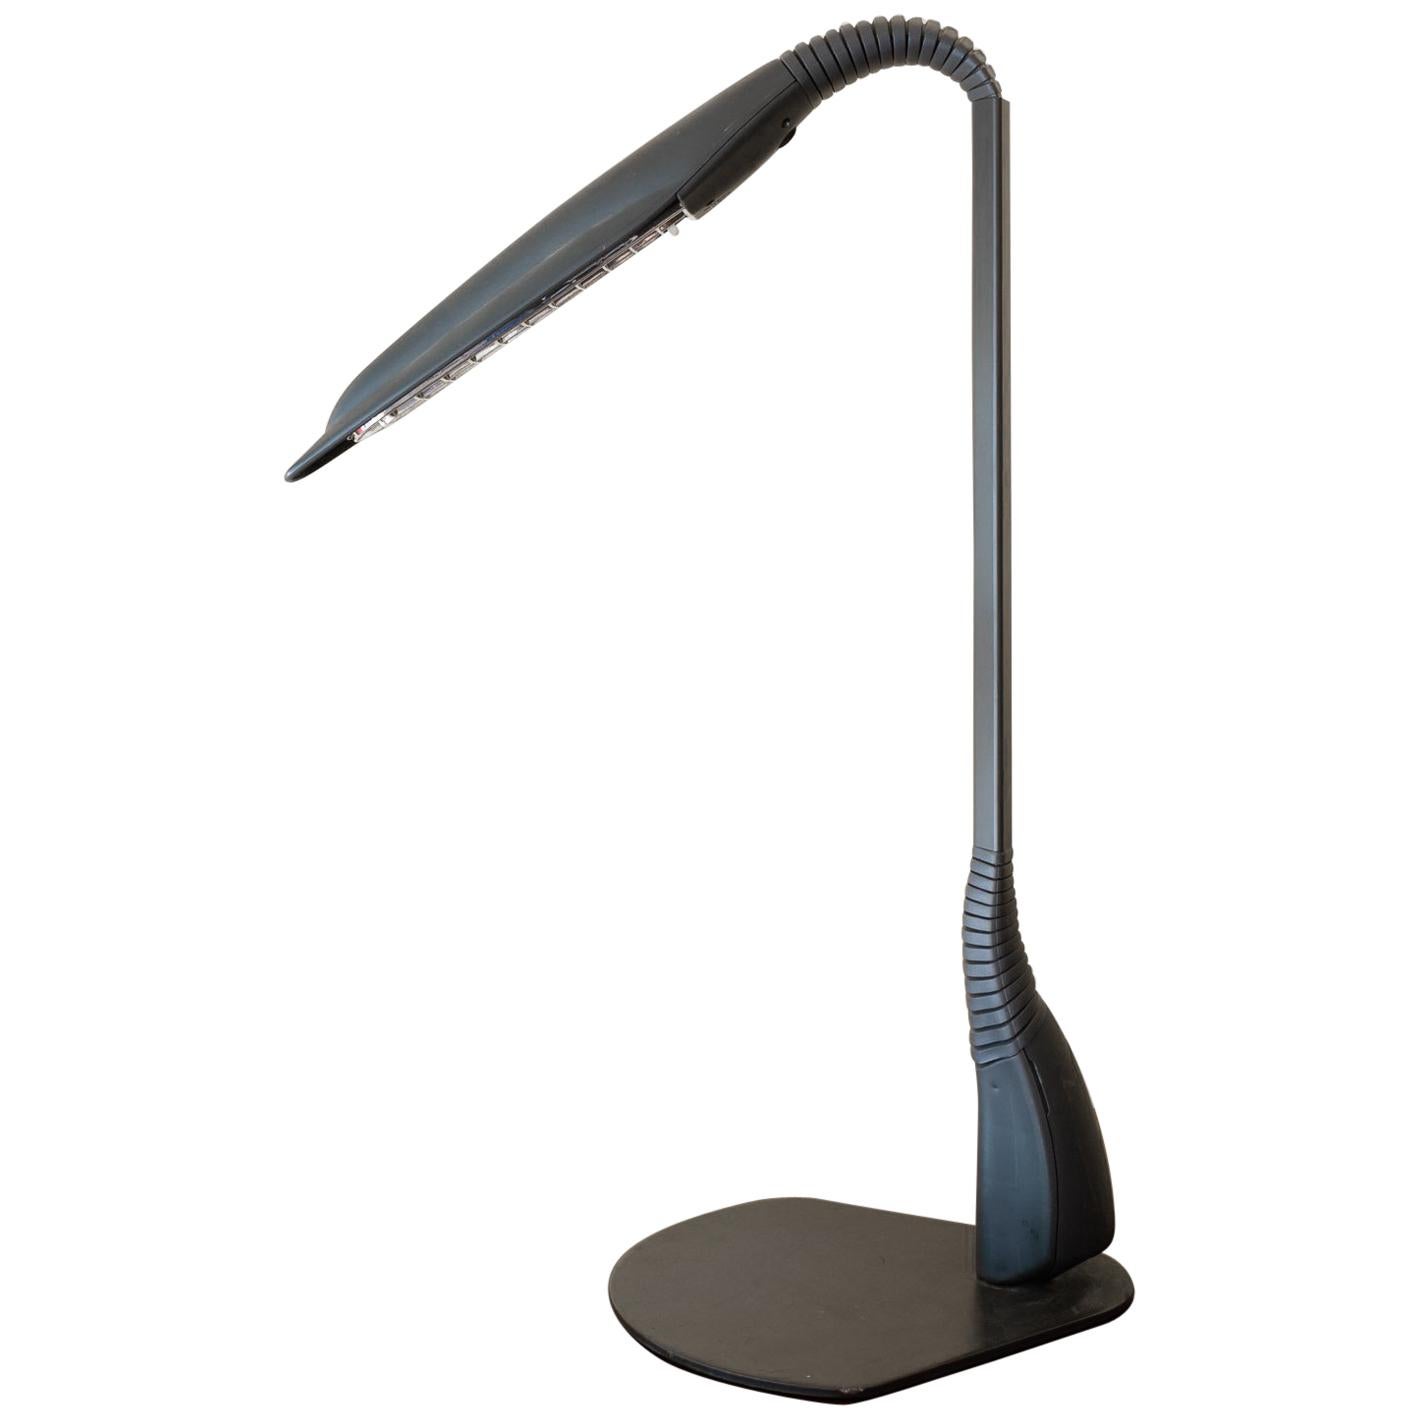 1980s French LED Cobra Desk Lamp by Philippe Michel for Manade